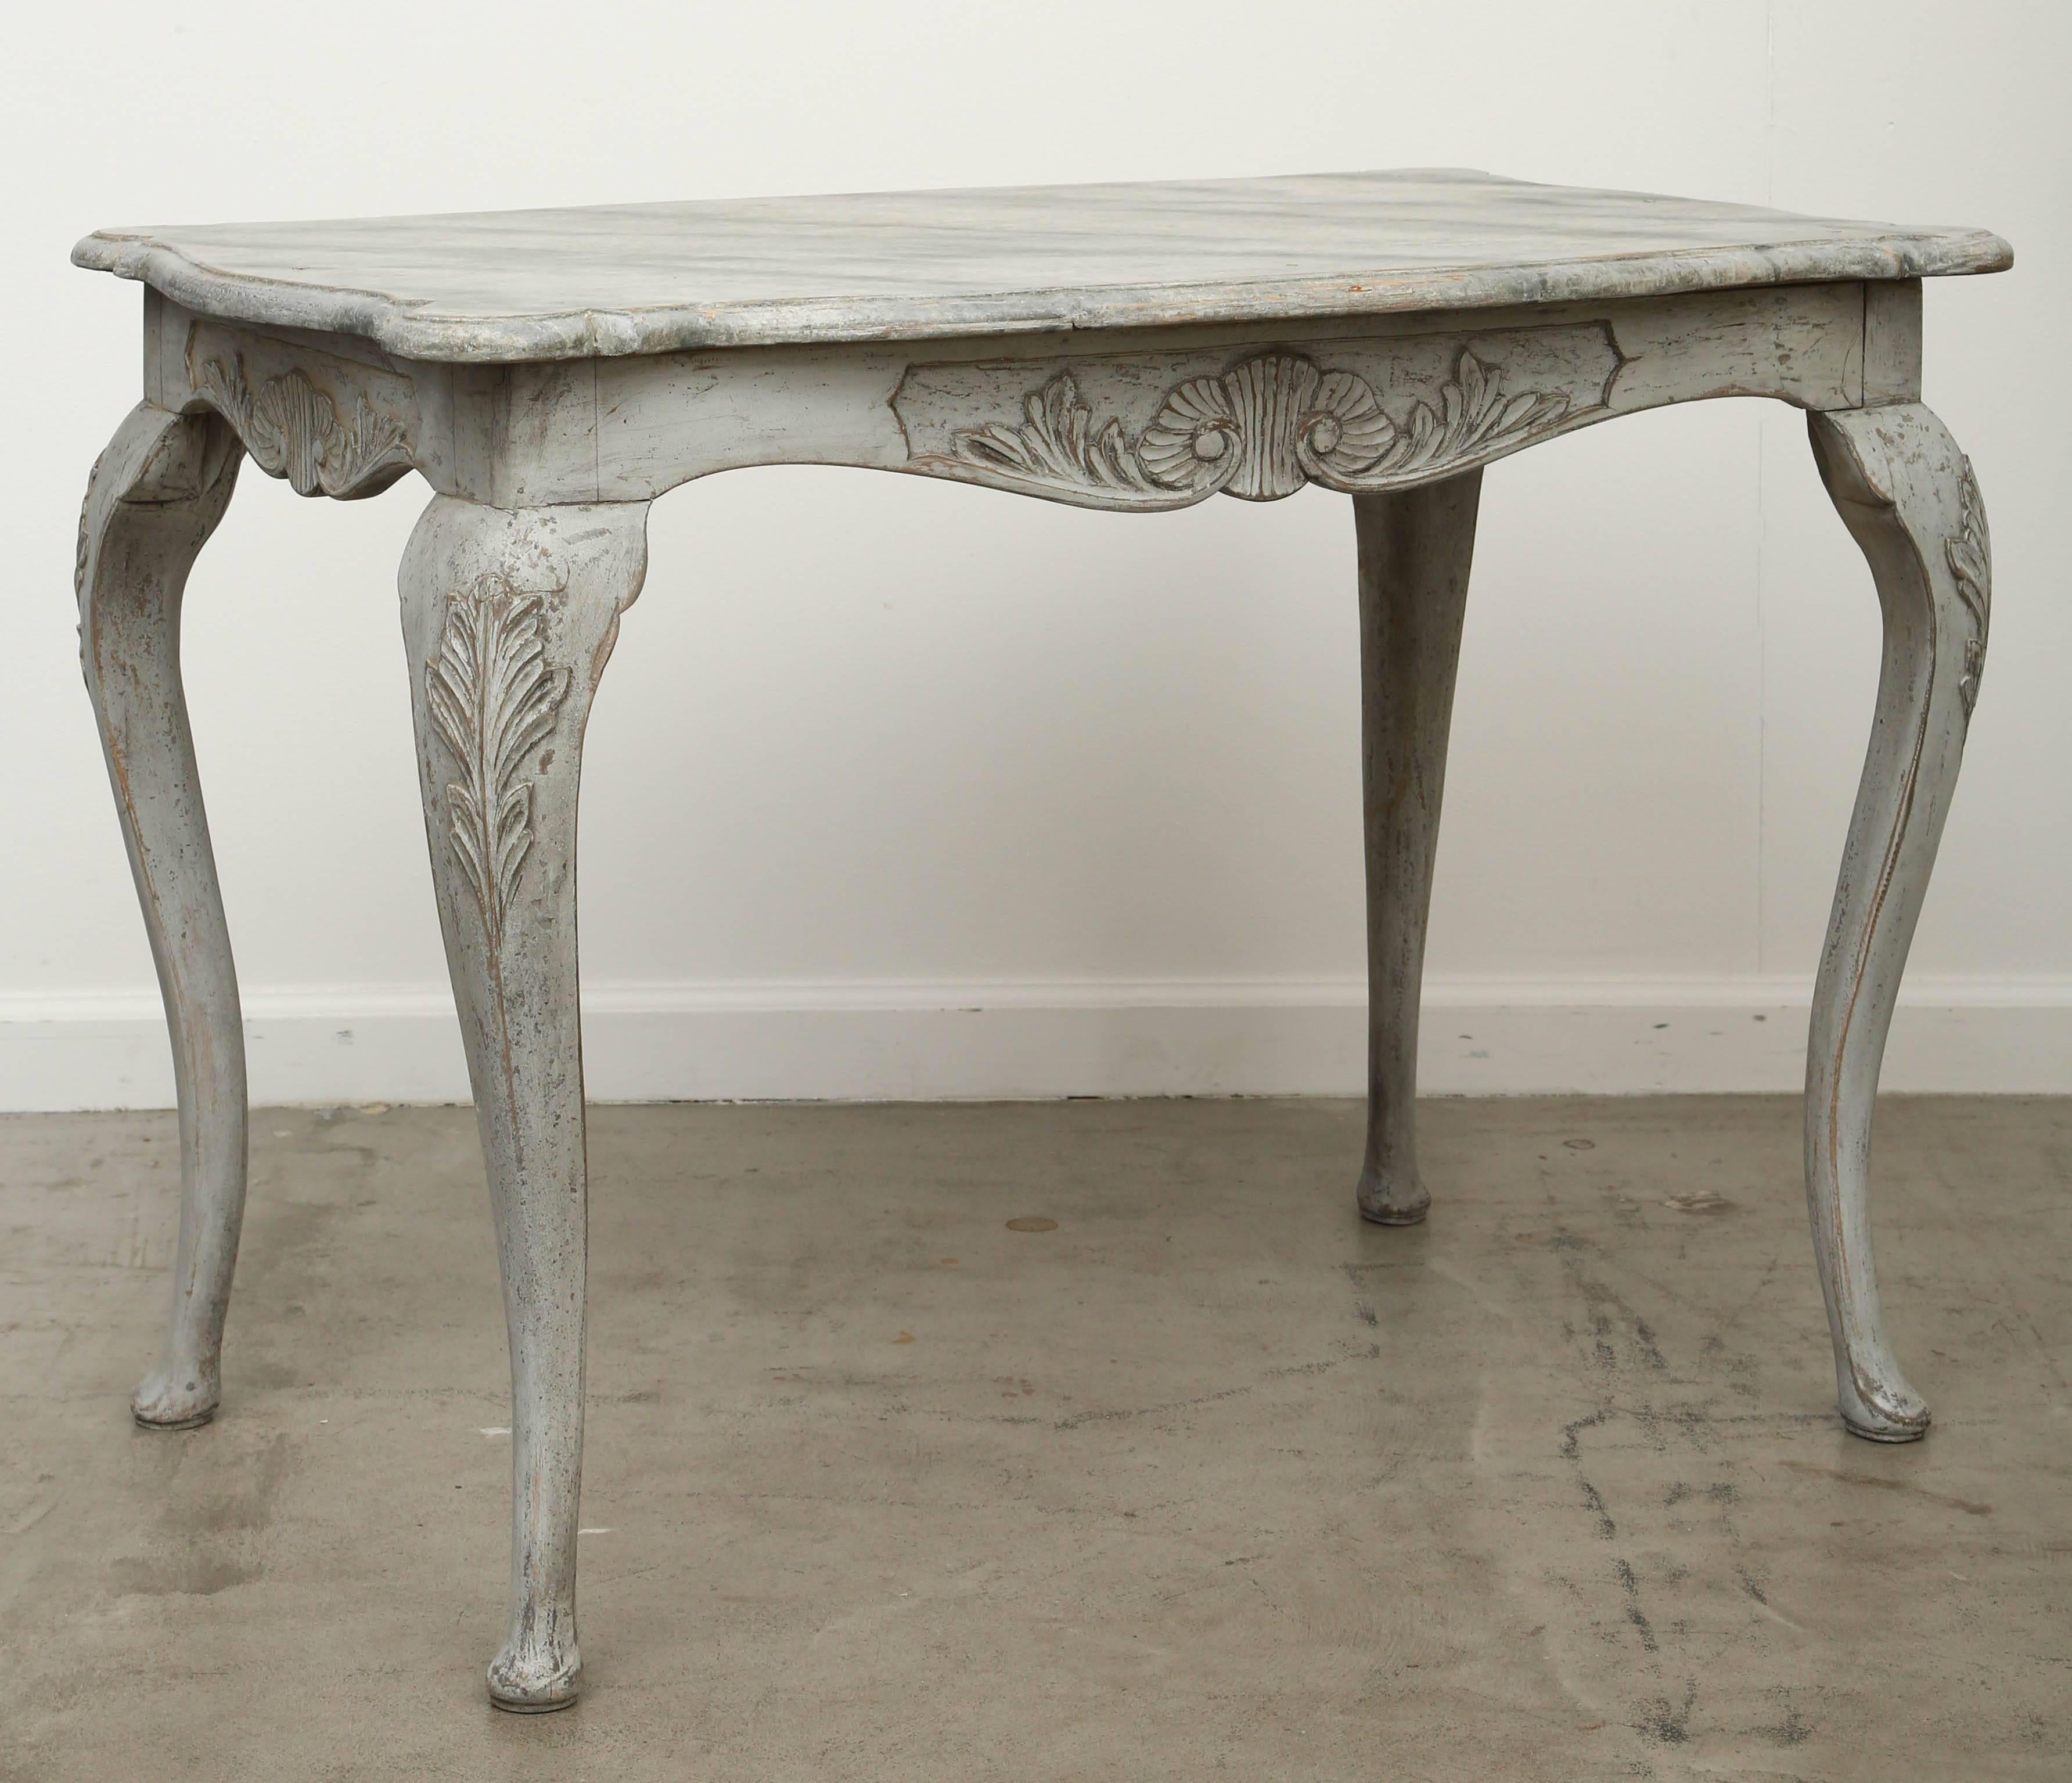 Antique Swedish Rococo carved large painted table with faux marble top
early 19th century.
A very elegant large Swedish Rococo table with lovely carved cartouches on the apron and curved legs, top is gray faux marble distressed finish.  Base is gray